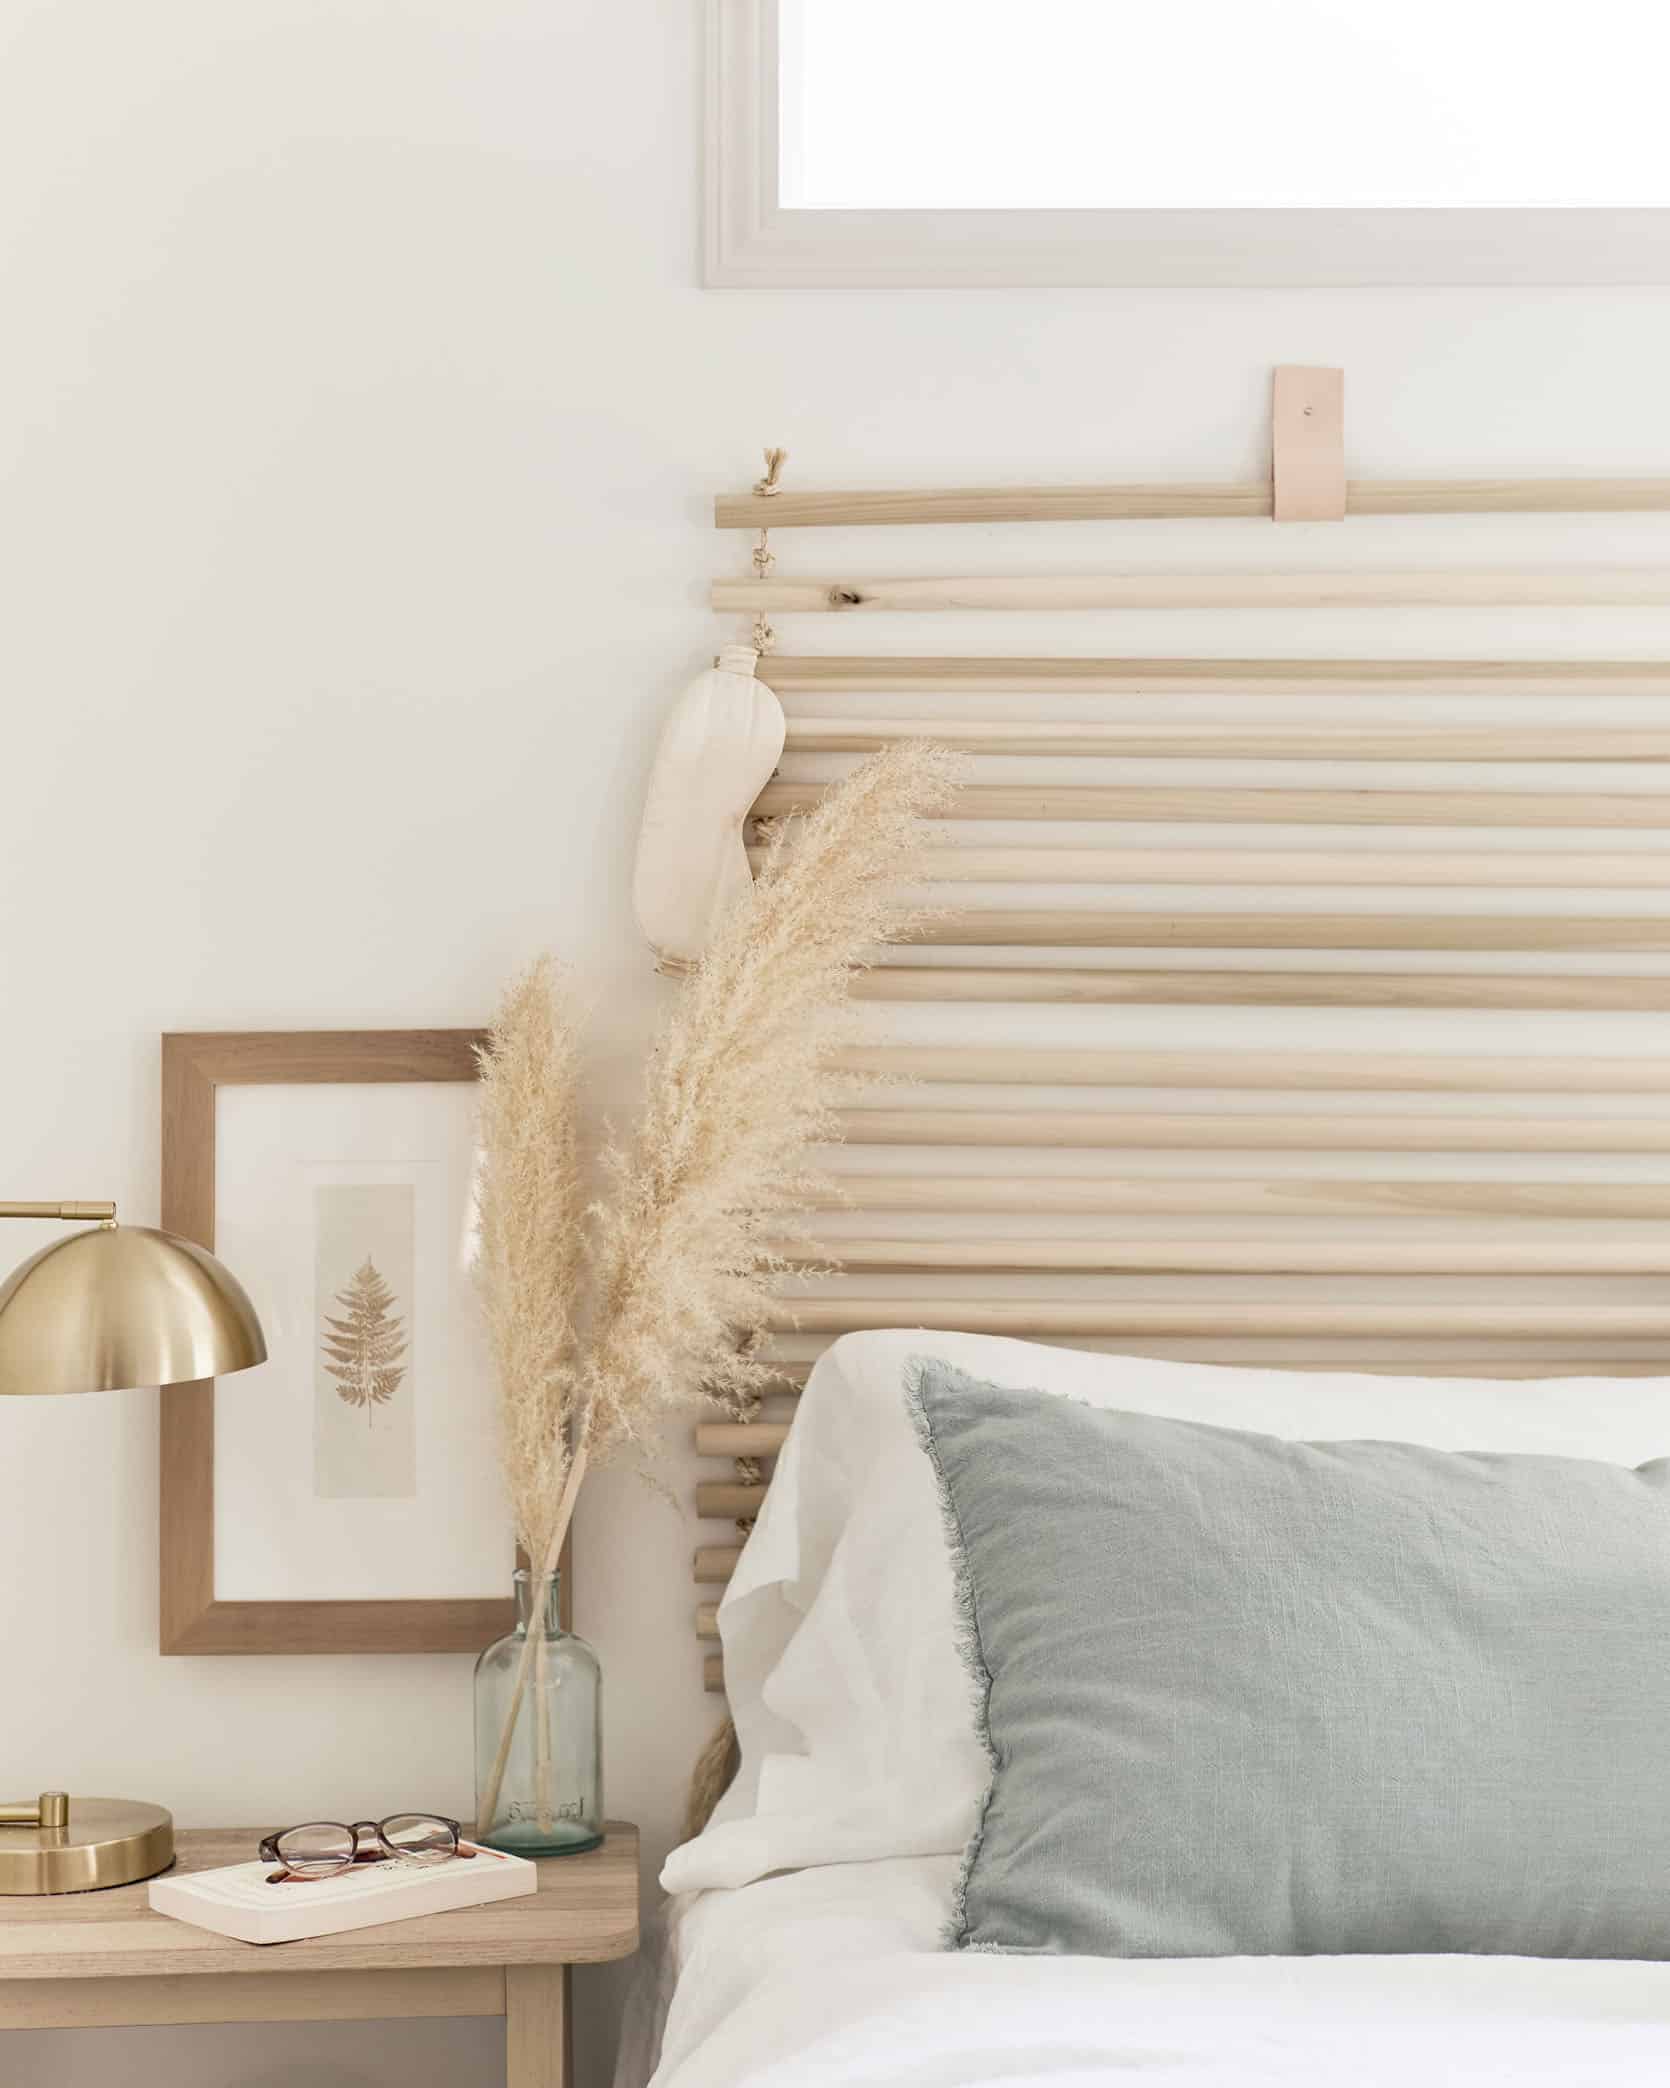 The Diy Headboard You All Wanted To Know About